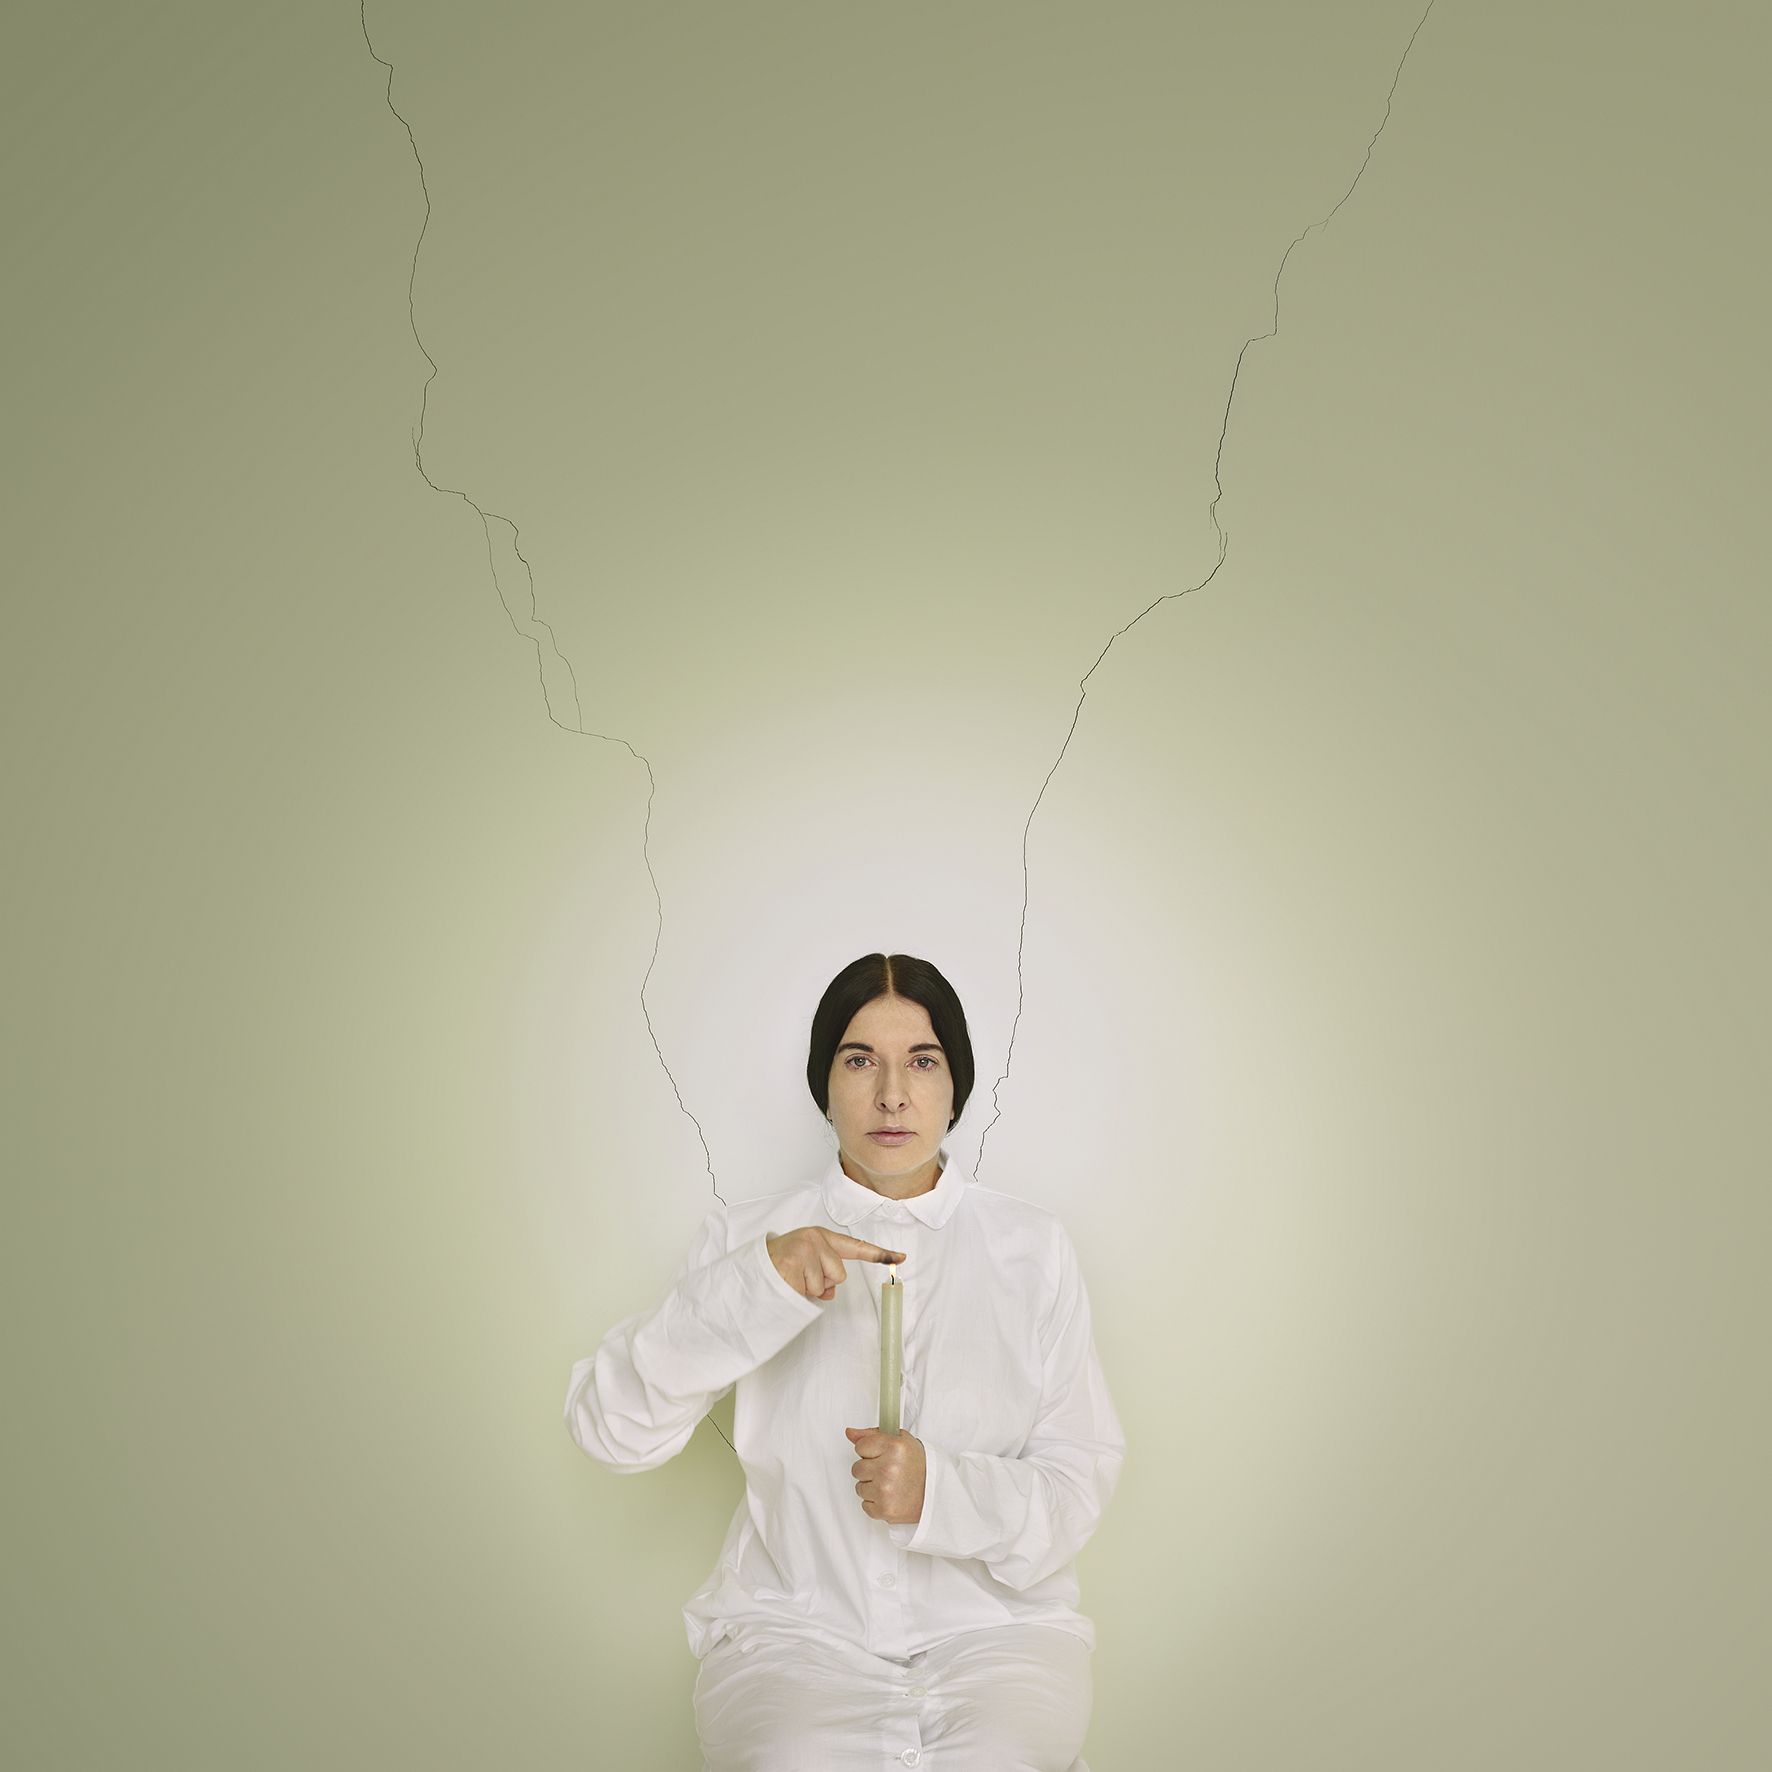 Marina Abramović Artist Portrait with a Candle (C) from the series Places of Power Brasilien 2013 © Marina Abramović, Courtesy of the Marina Abramović Archives VG Bild-Kunst, Bonn 2018